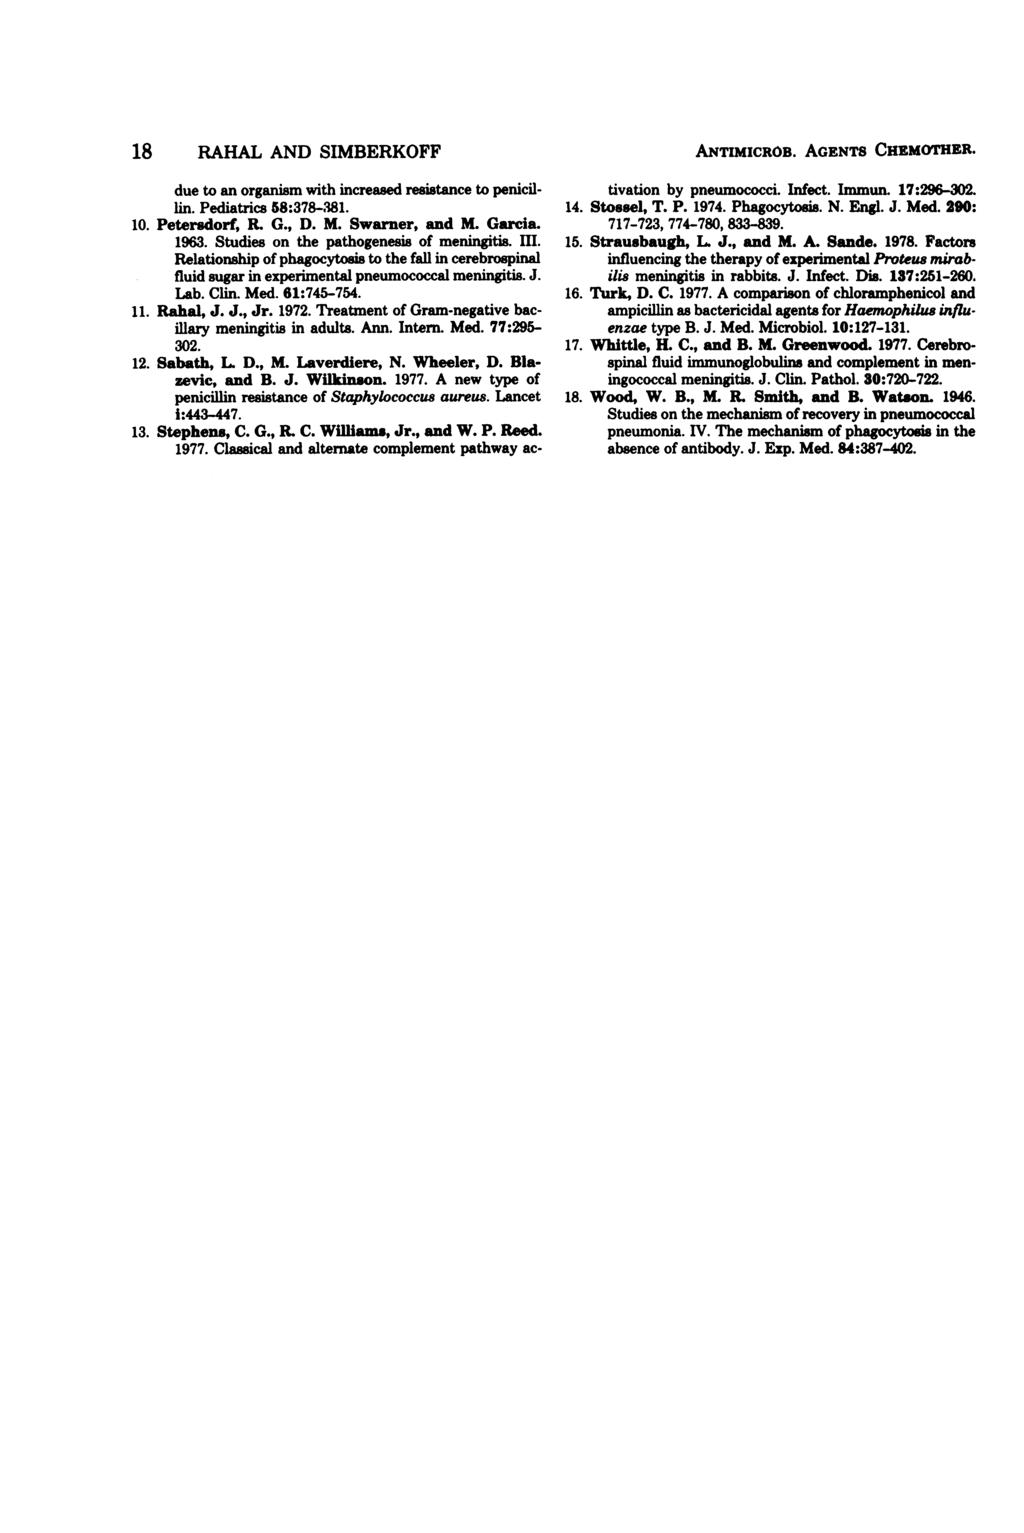 18 RAHAL AND SIMBERKOFF due to an organism with increased resistance to penicillin. Pediatrics 58:378-381. 1. Petersdorf, R. G., D. M. Swarner, and M. Garcia. 1963.